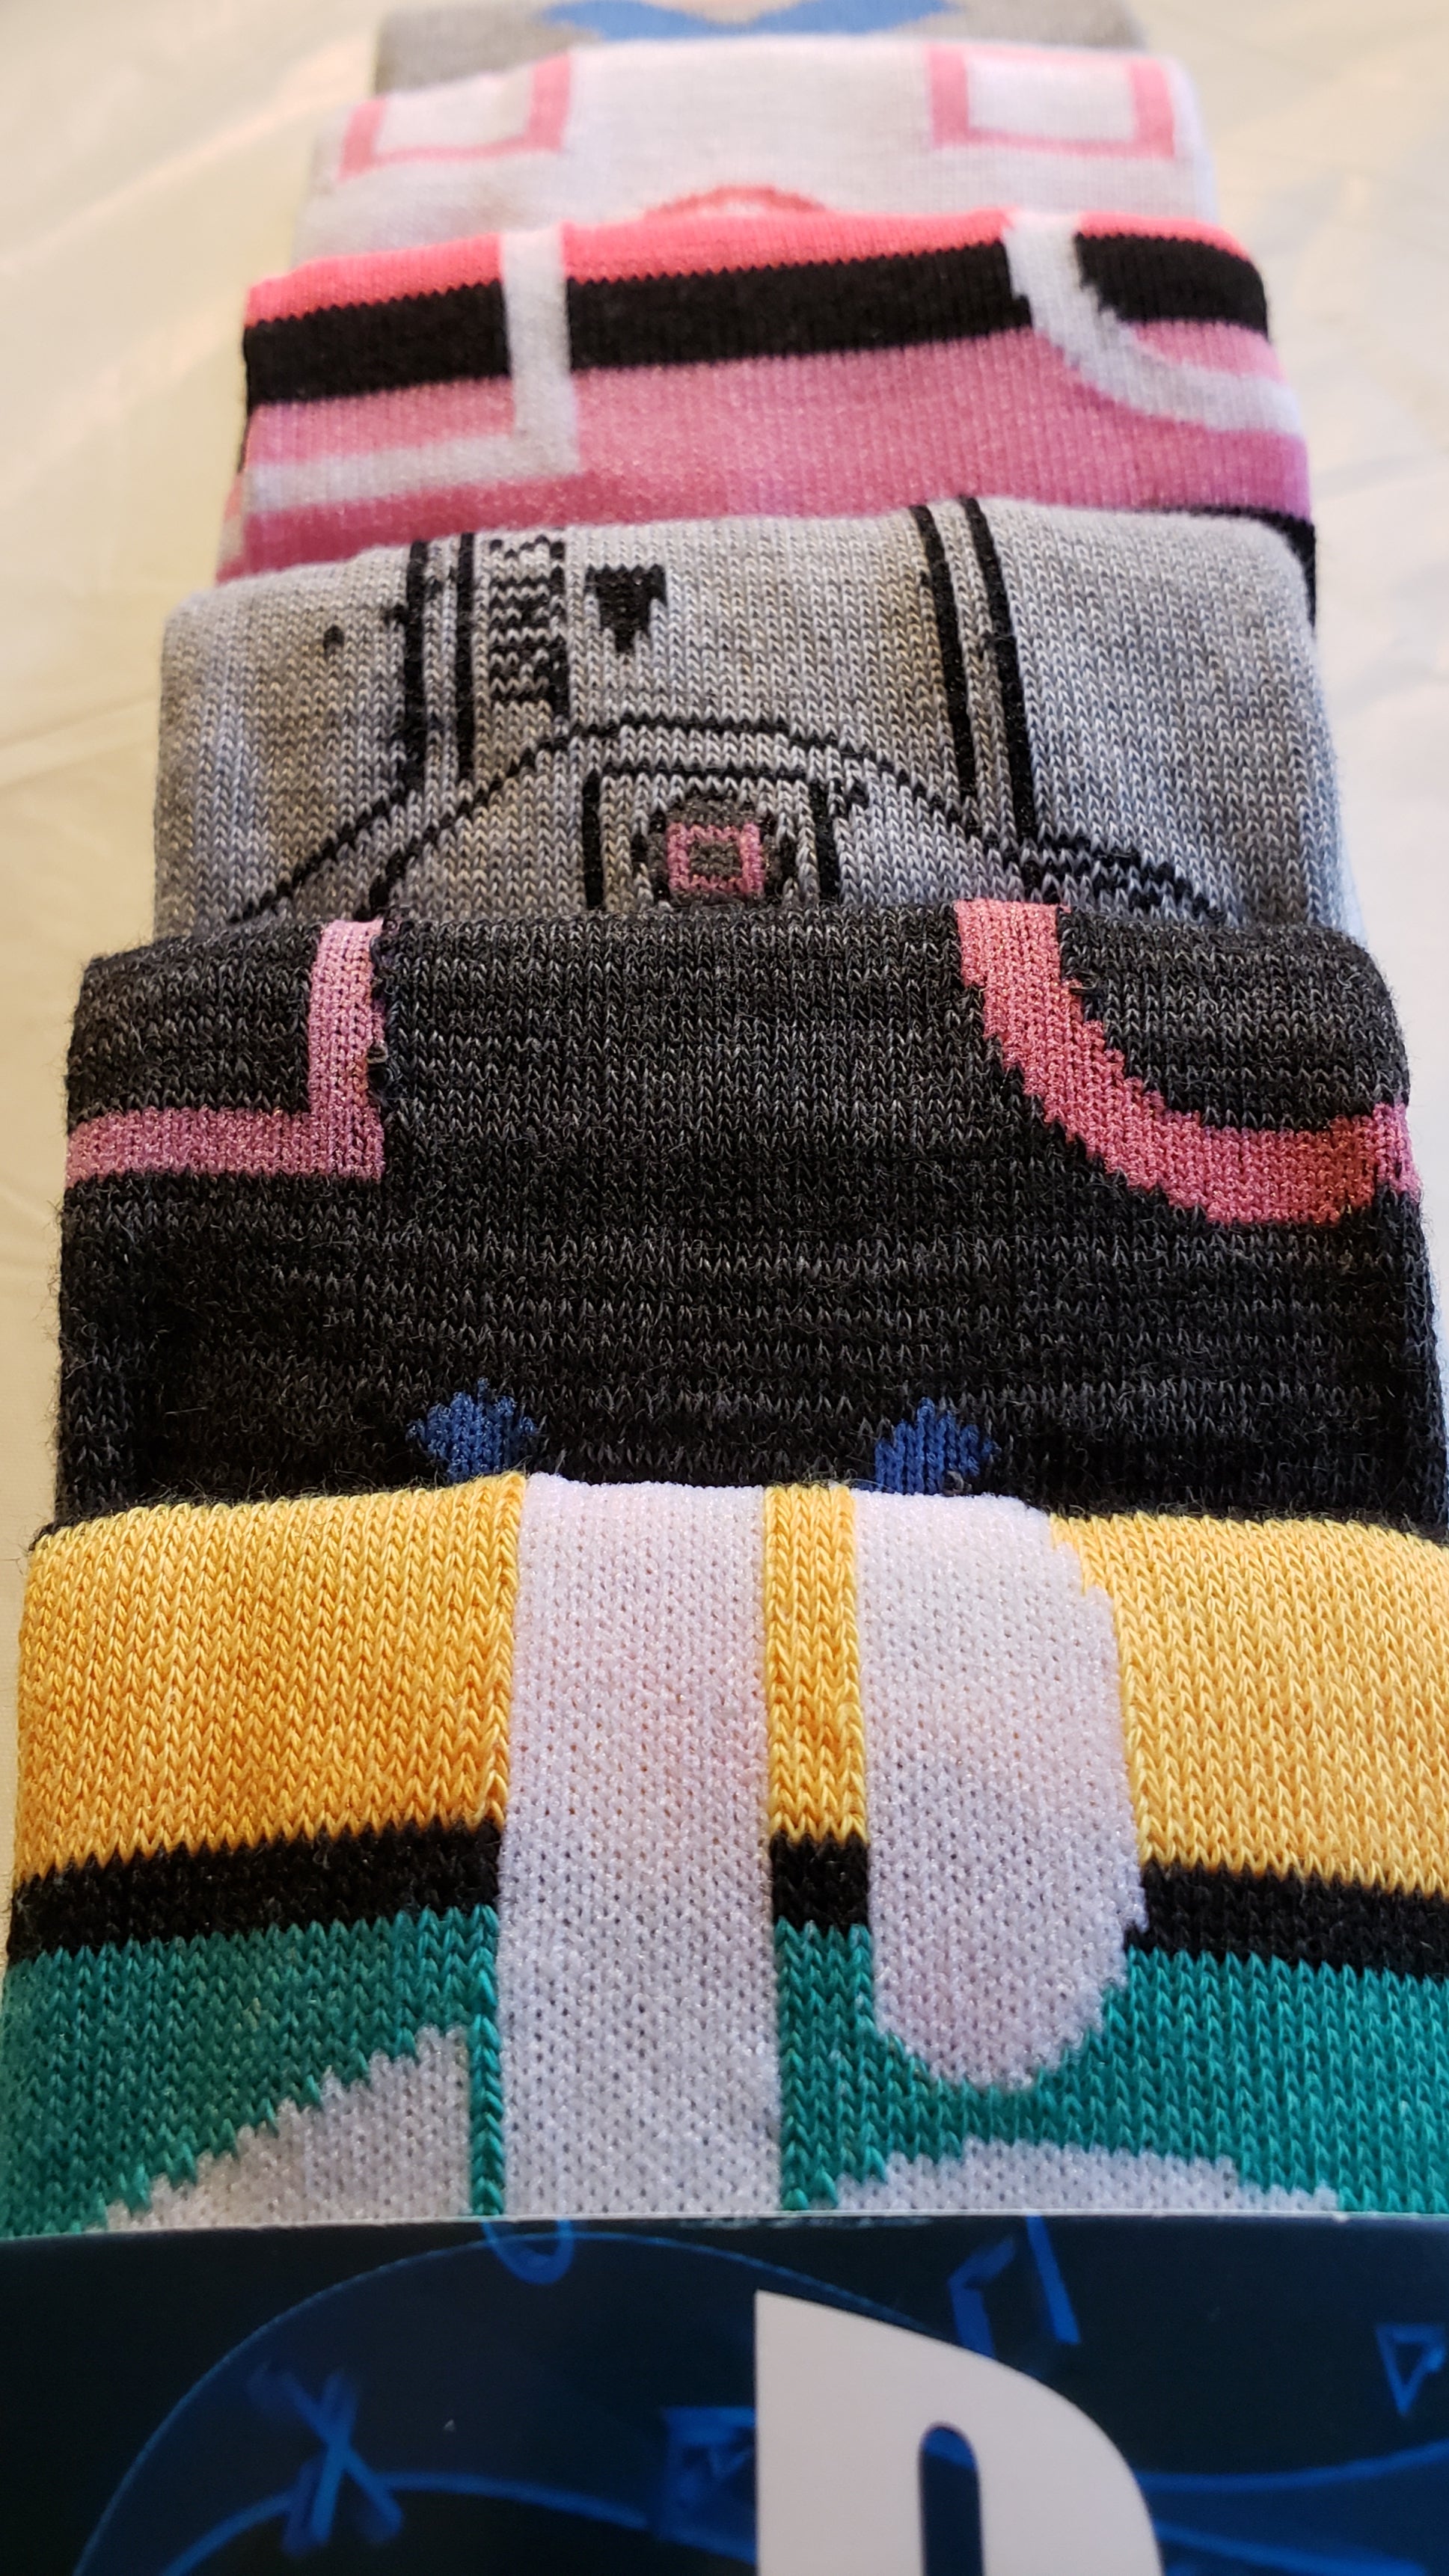 Playstation Ankle Sox